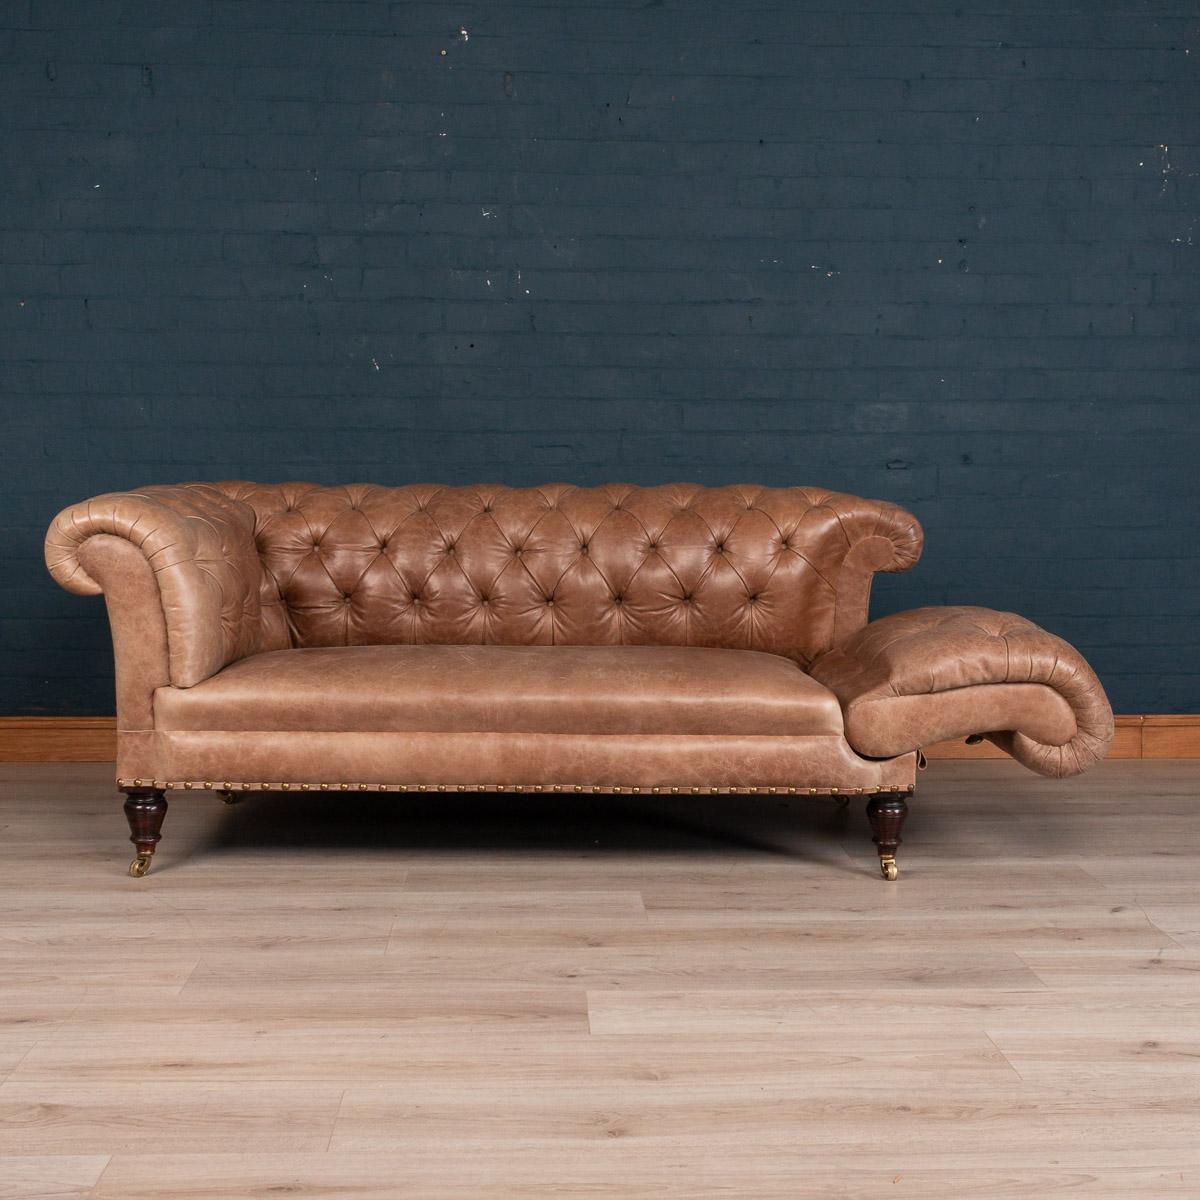 Antique 19th century Victorian two-seat leather sofa with 